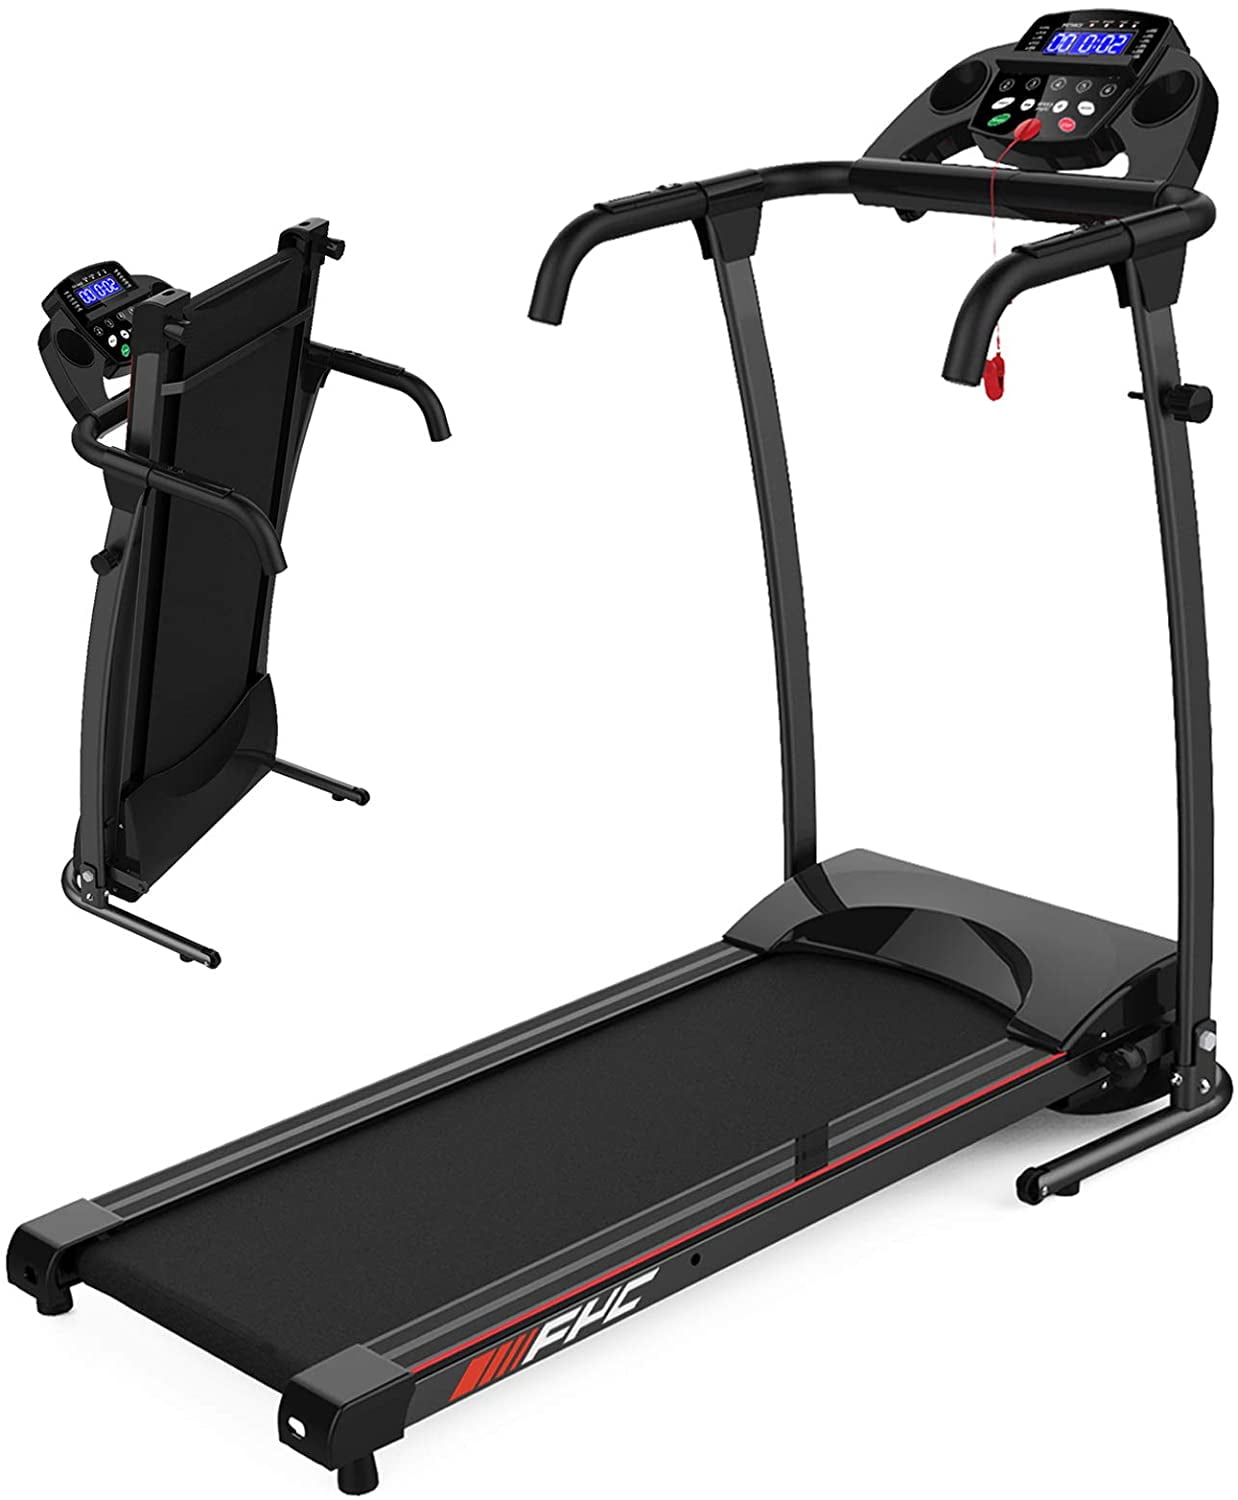 Details about   Folding Treadmill Electric Motorized Power Running Jogging Fitness Machine 220LB 